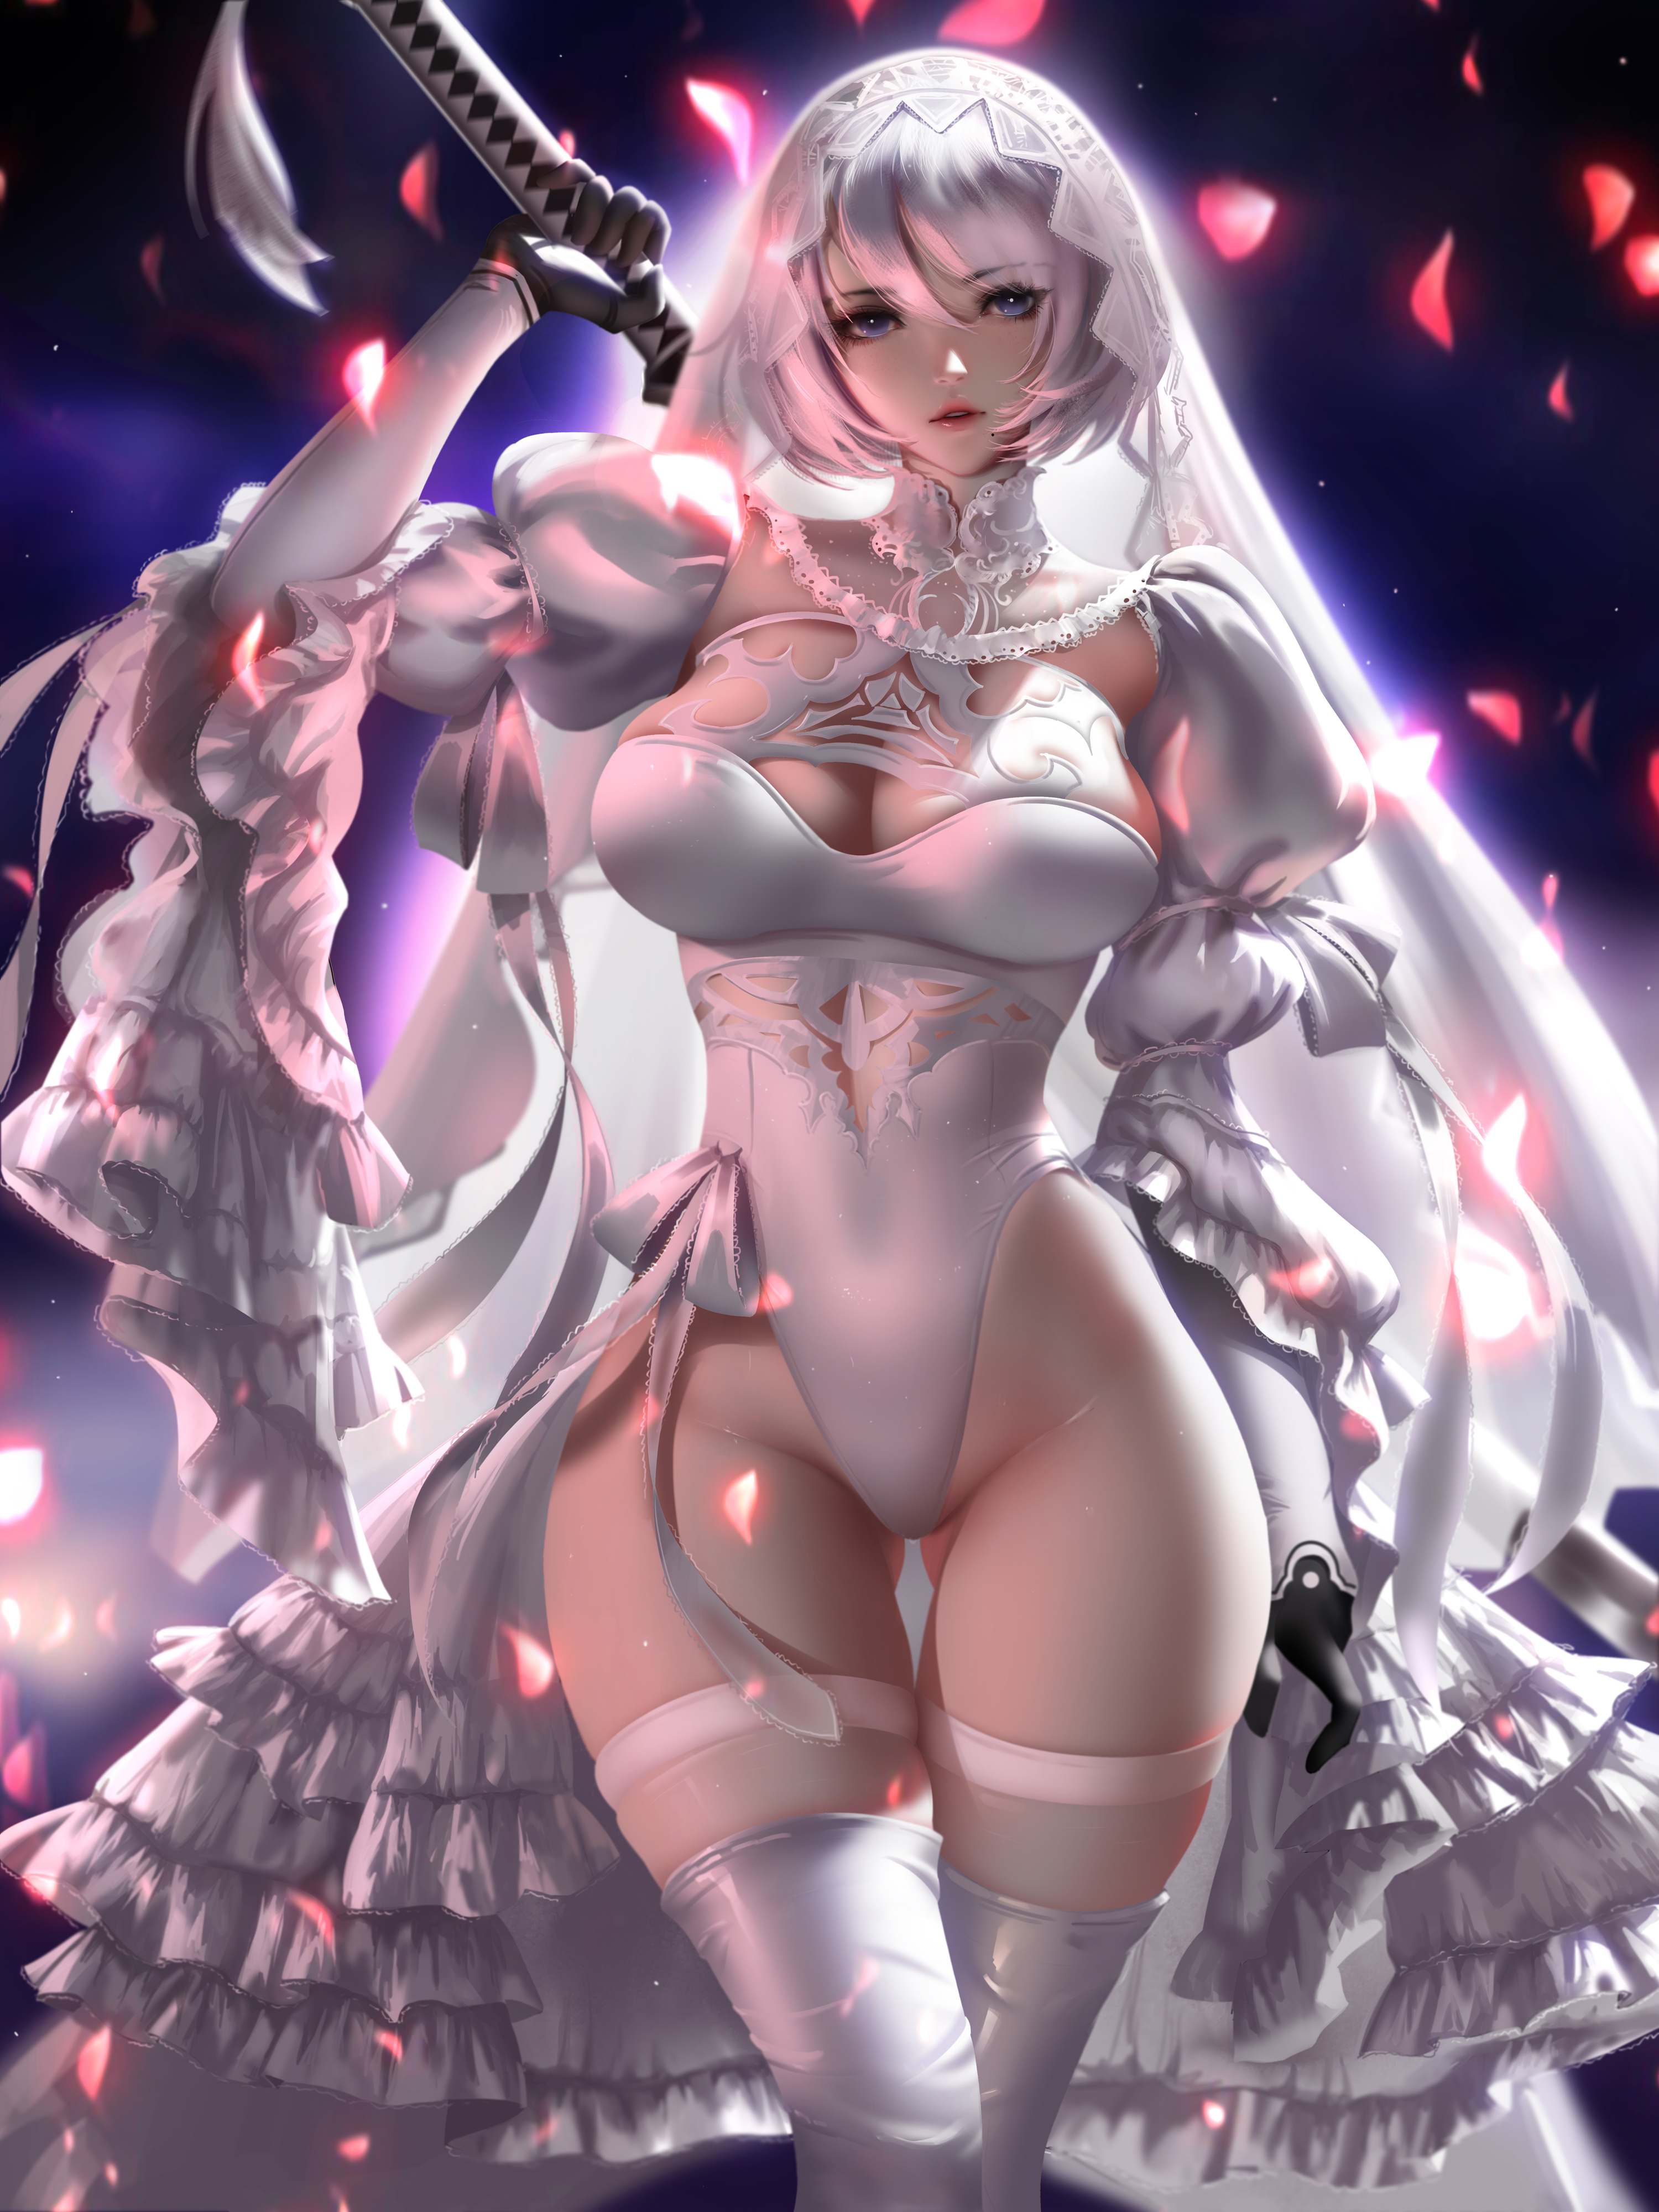 General 3000x4000 2B (Nier: Automata) Nier: Automata video games video game characters video game girls women white hair blue eyes veils cleavage bodysuit curvy the gap big boobs stockings white stockings lingerie thigh high boots gloves petals weapon artwork drawing digital art fan art Liang-Xing brides thighs